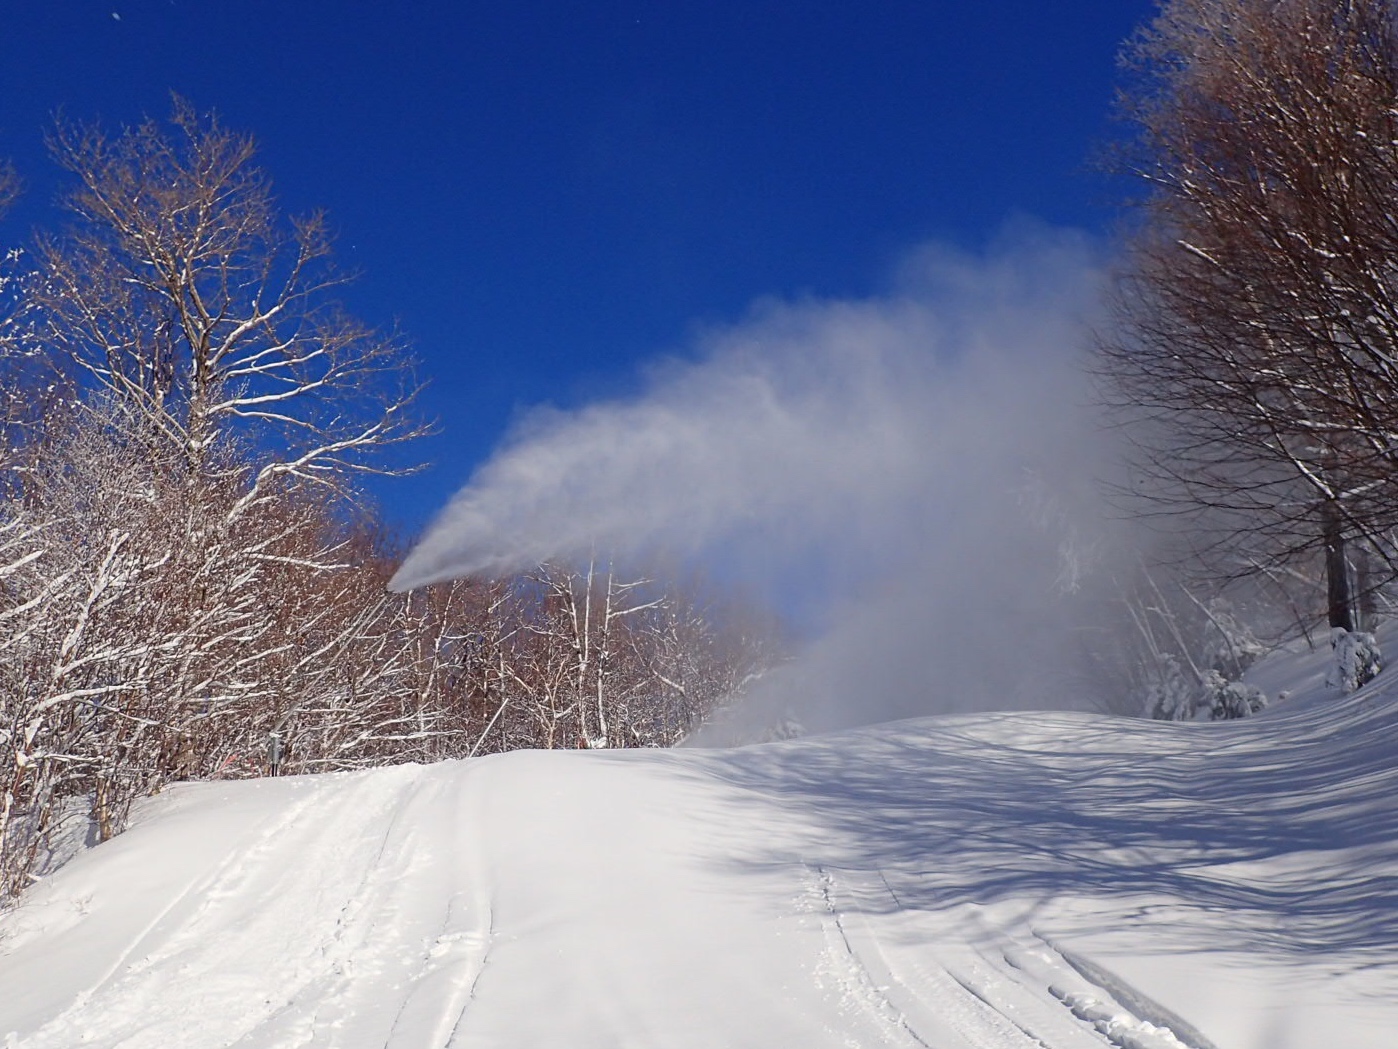 Snowmaking on Midway